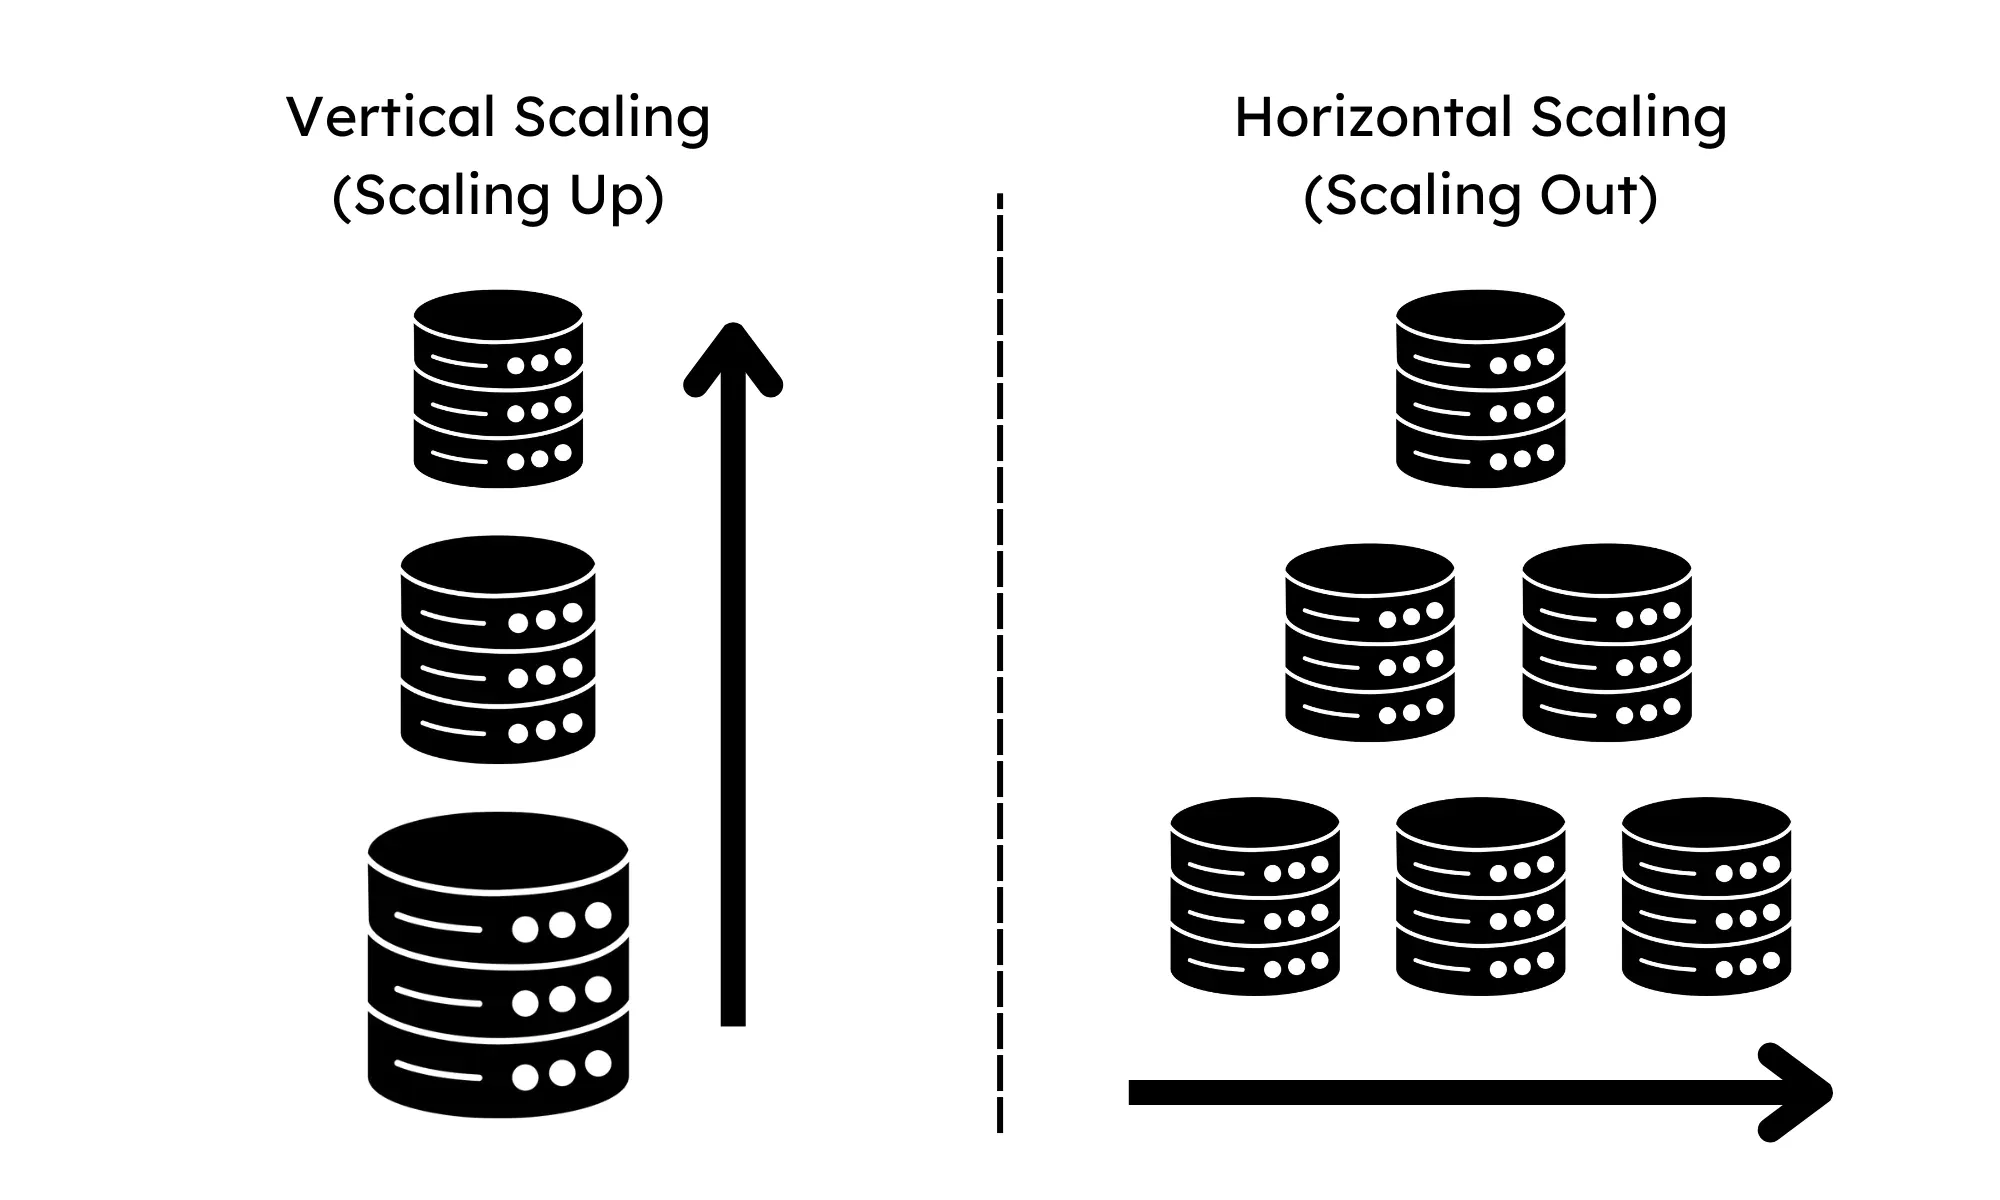 Vertical Scaling and Horizontal Scaling